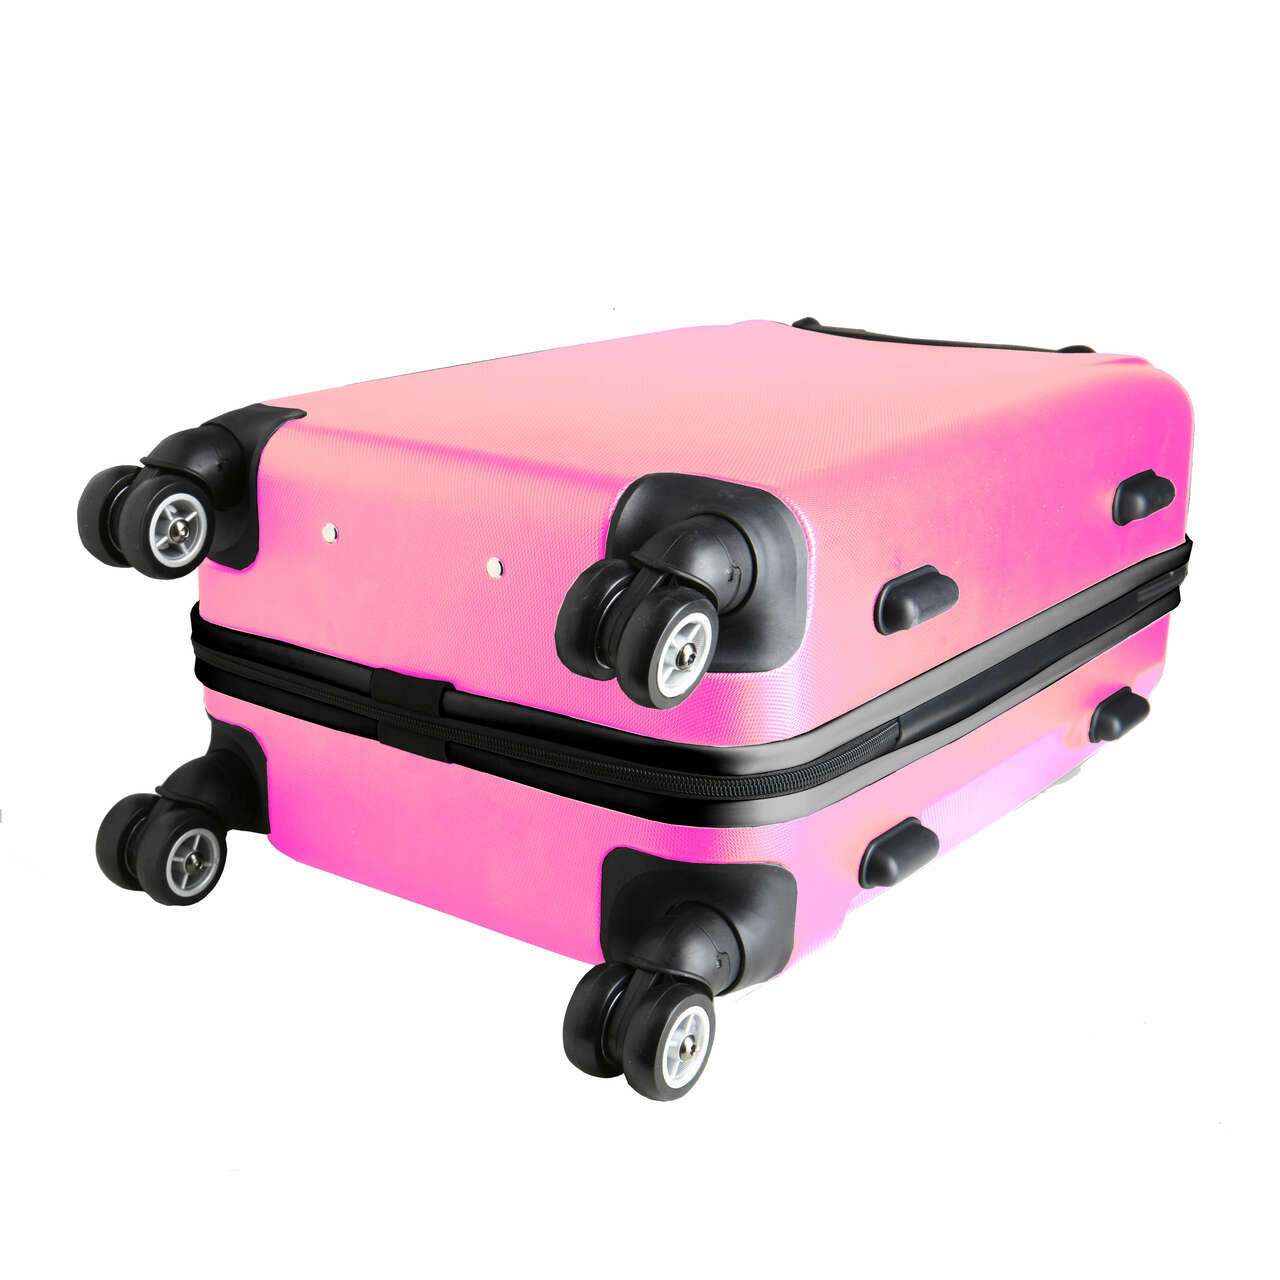 Providence Friars 20" Pink Domestic Carry-on Spinner